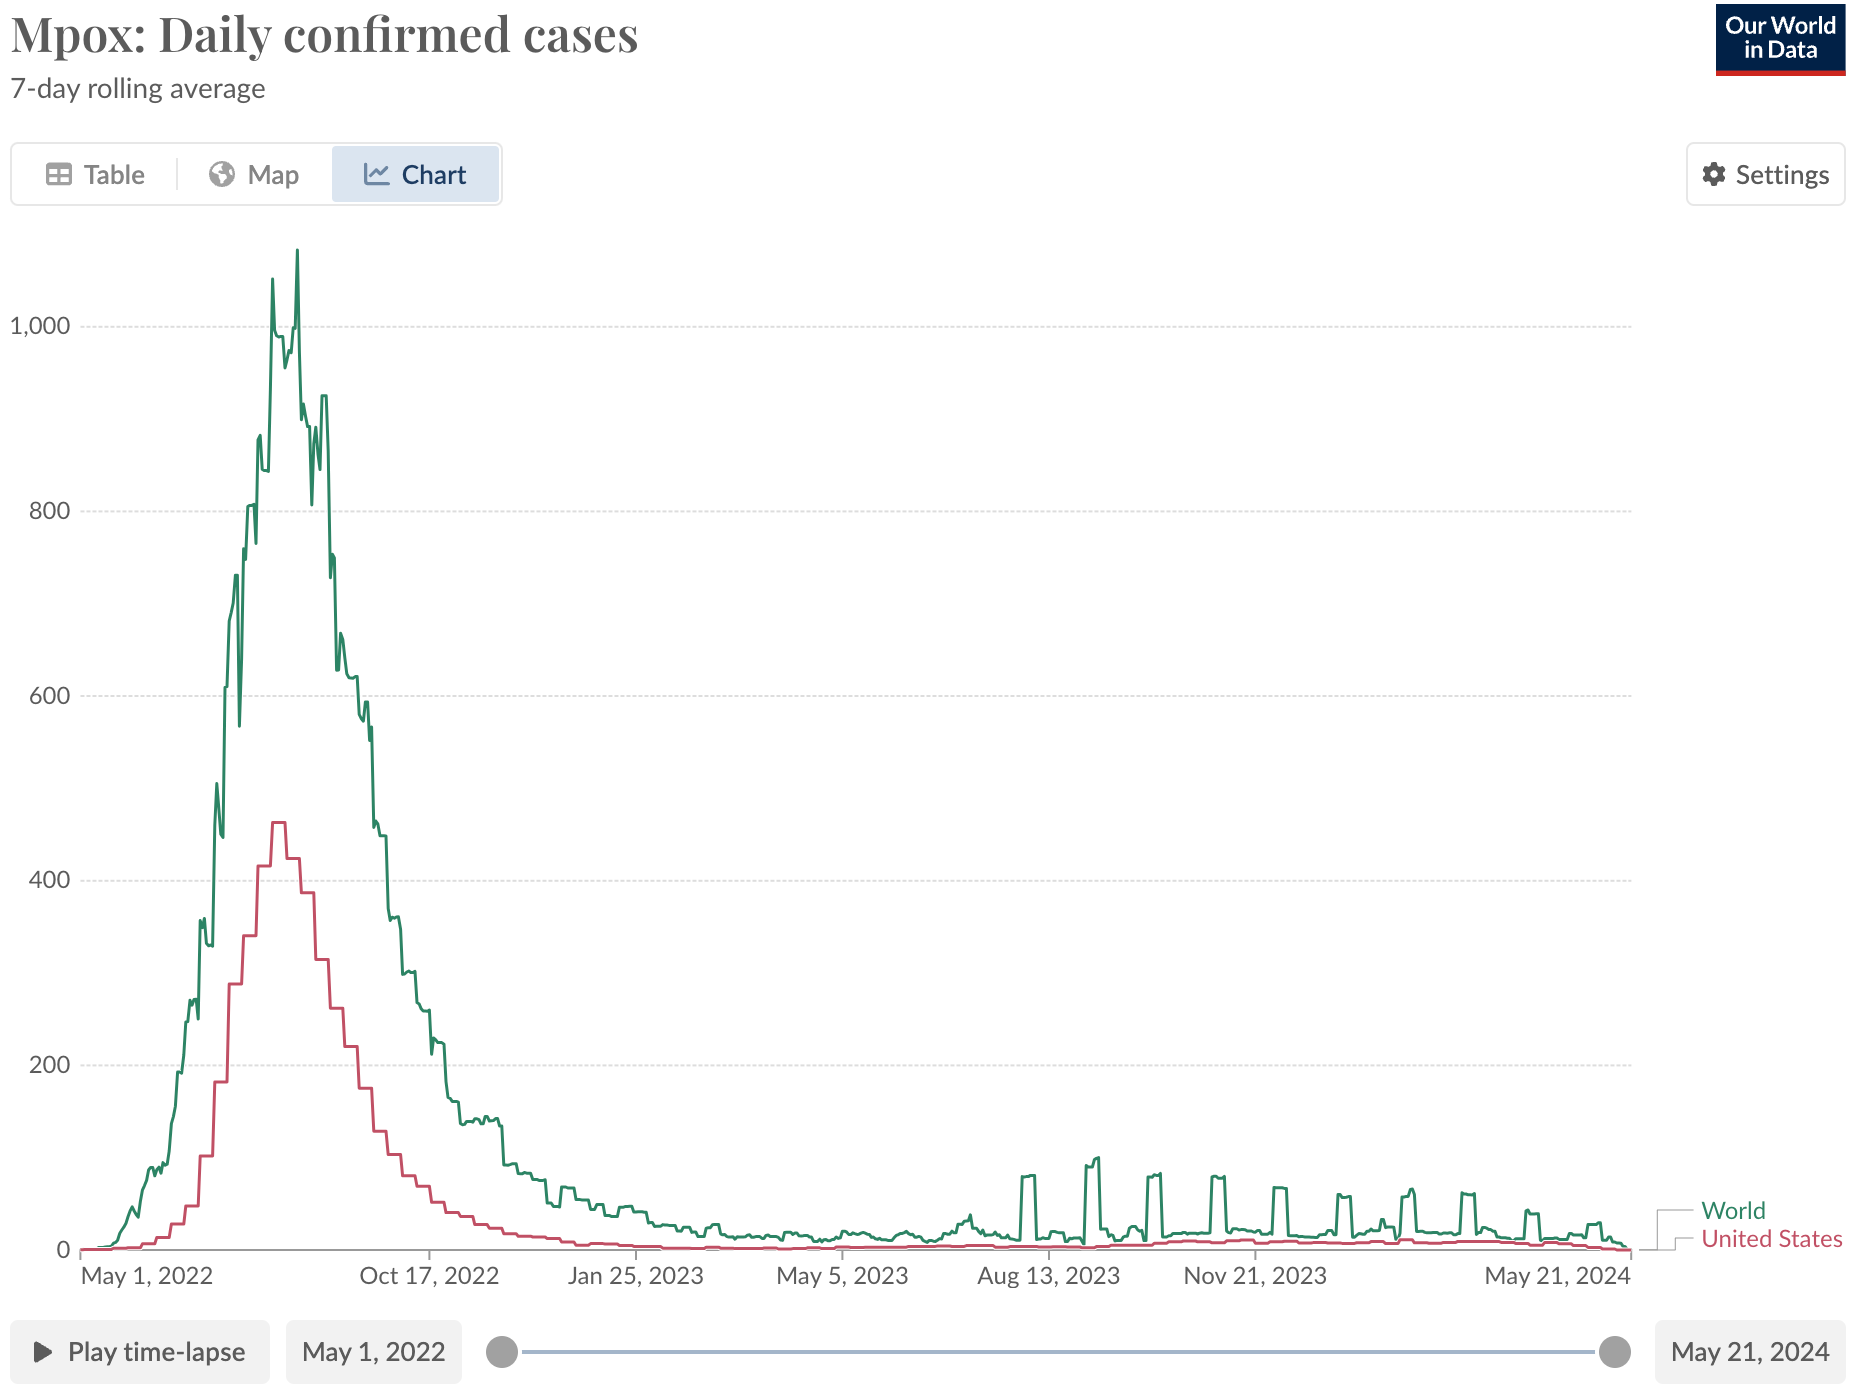 Mpox: Daily confirmed cases, 2022-2024 (Our World in Data)